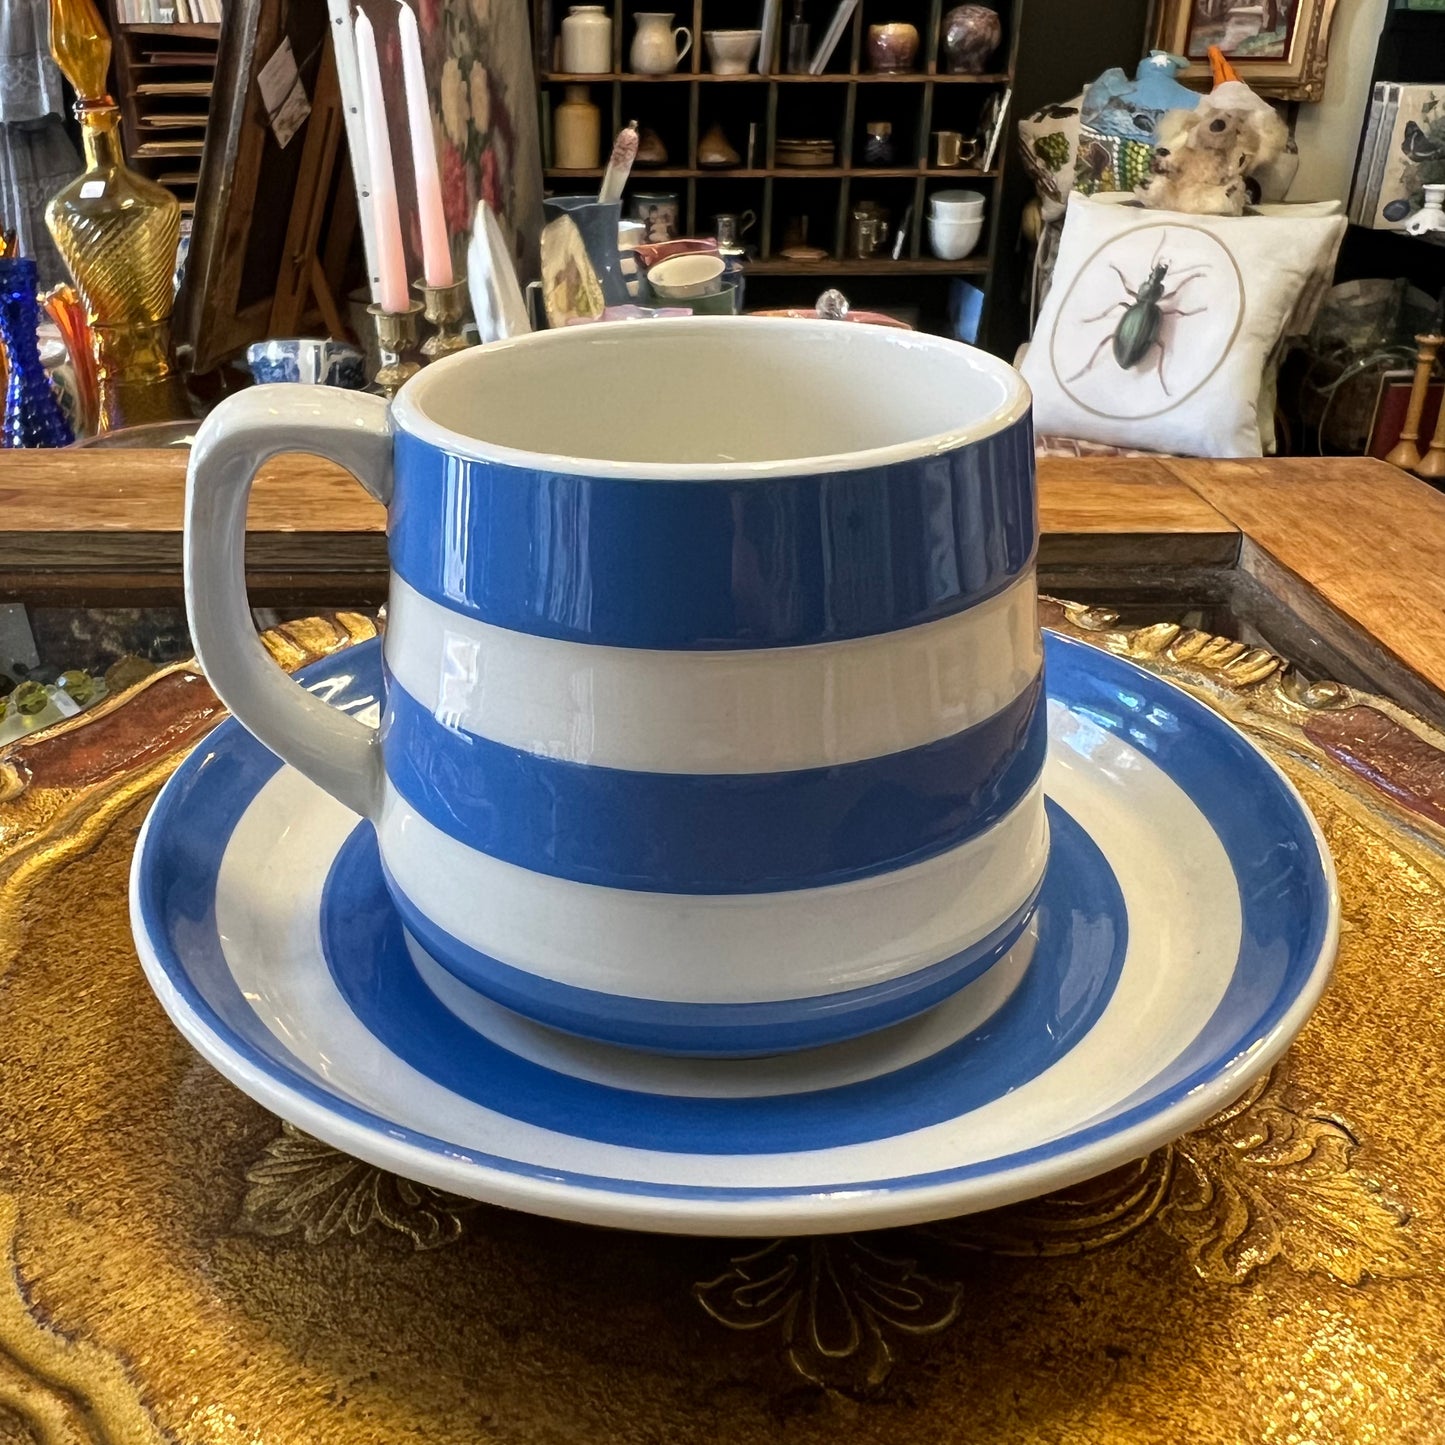 Vintage TG Green Blue Stripe Cup and Saucer